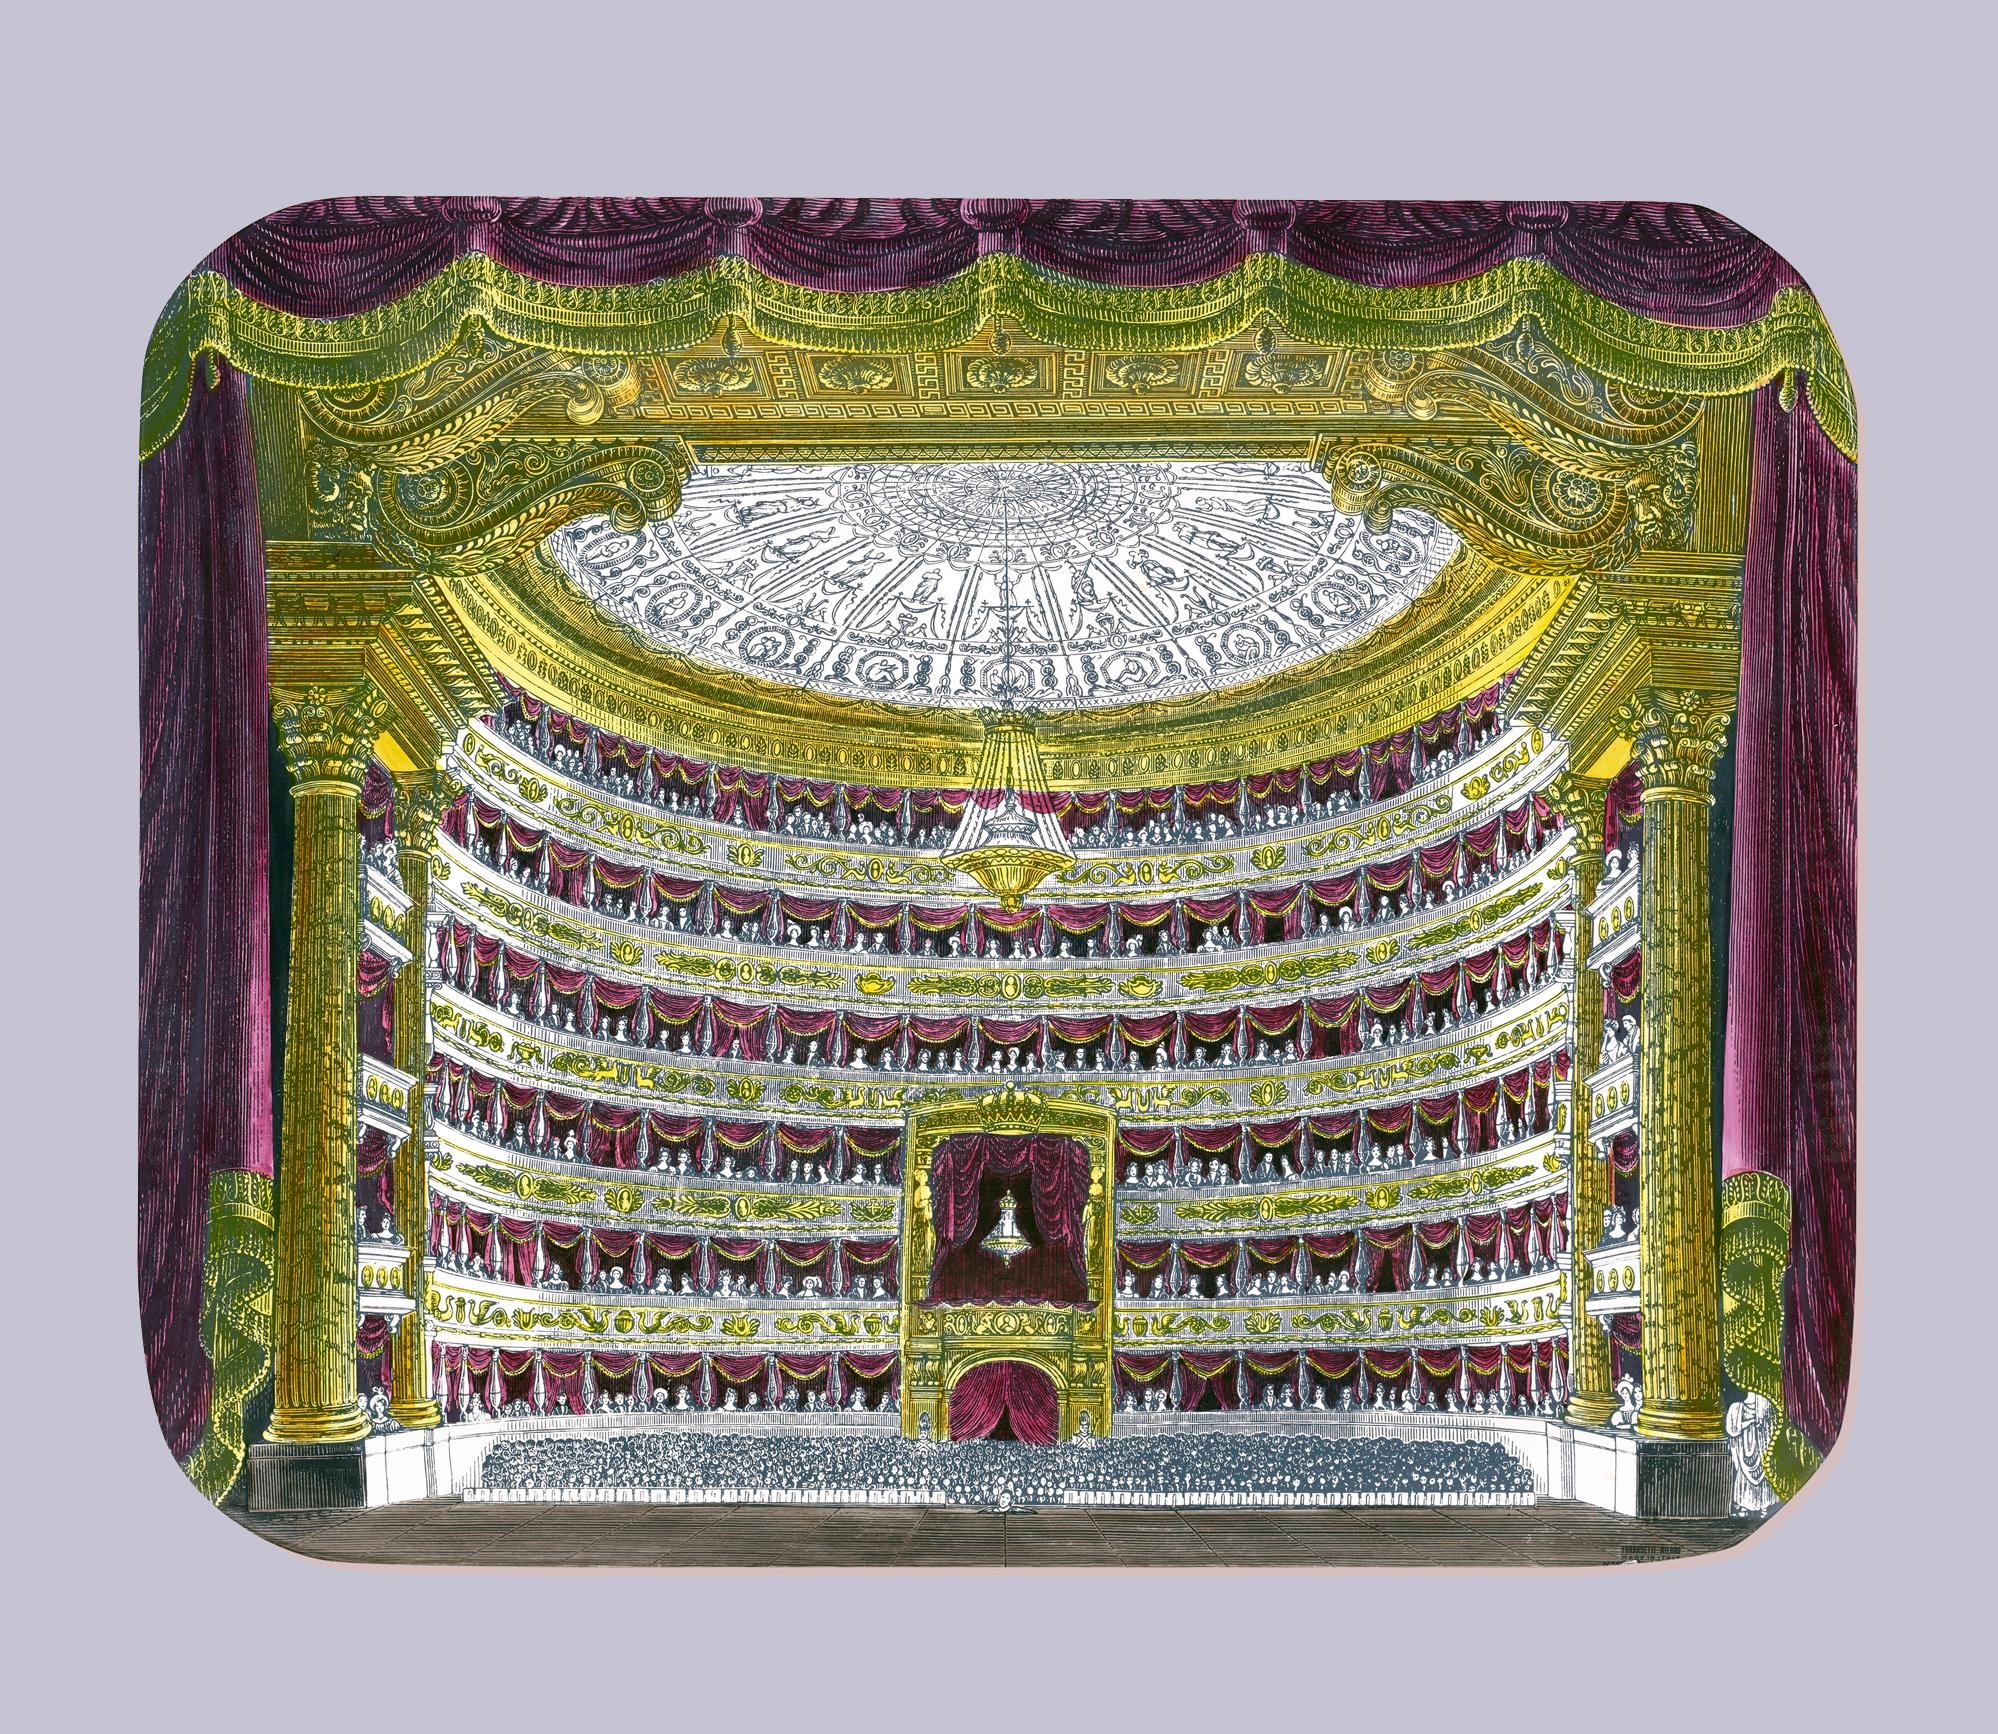 Piero Fornasetti large tray La Scala Opera House
Painted by Hand,
Teatro alla Scala
1955

The tray depicts the opera house as viewed from the stage looking out over the multiple steps of seating and the dramatic ceiling.

Dimensions: 19